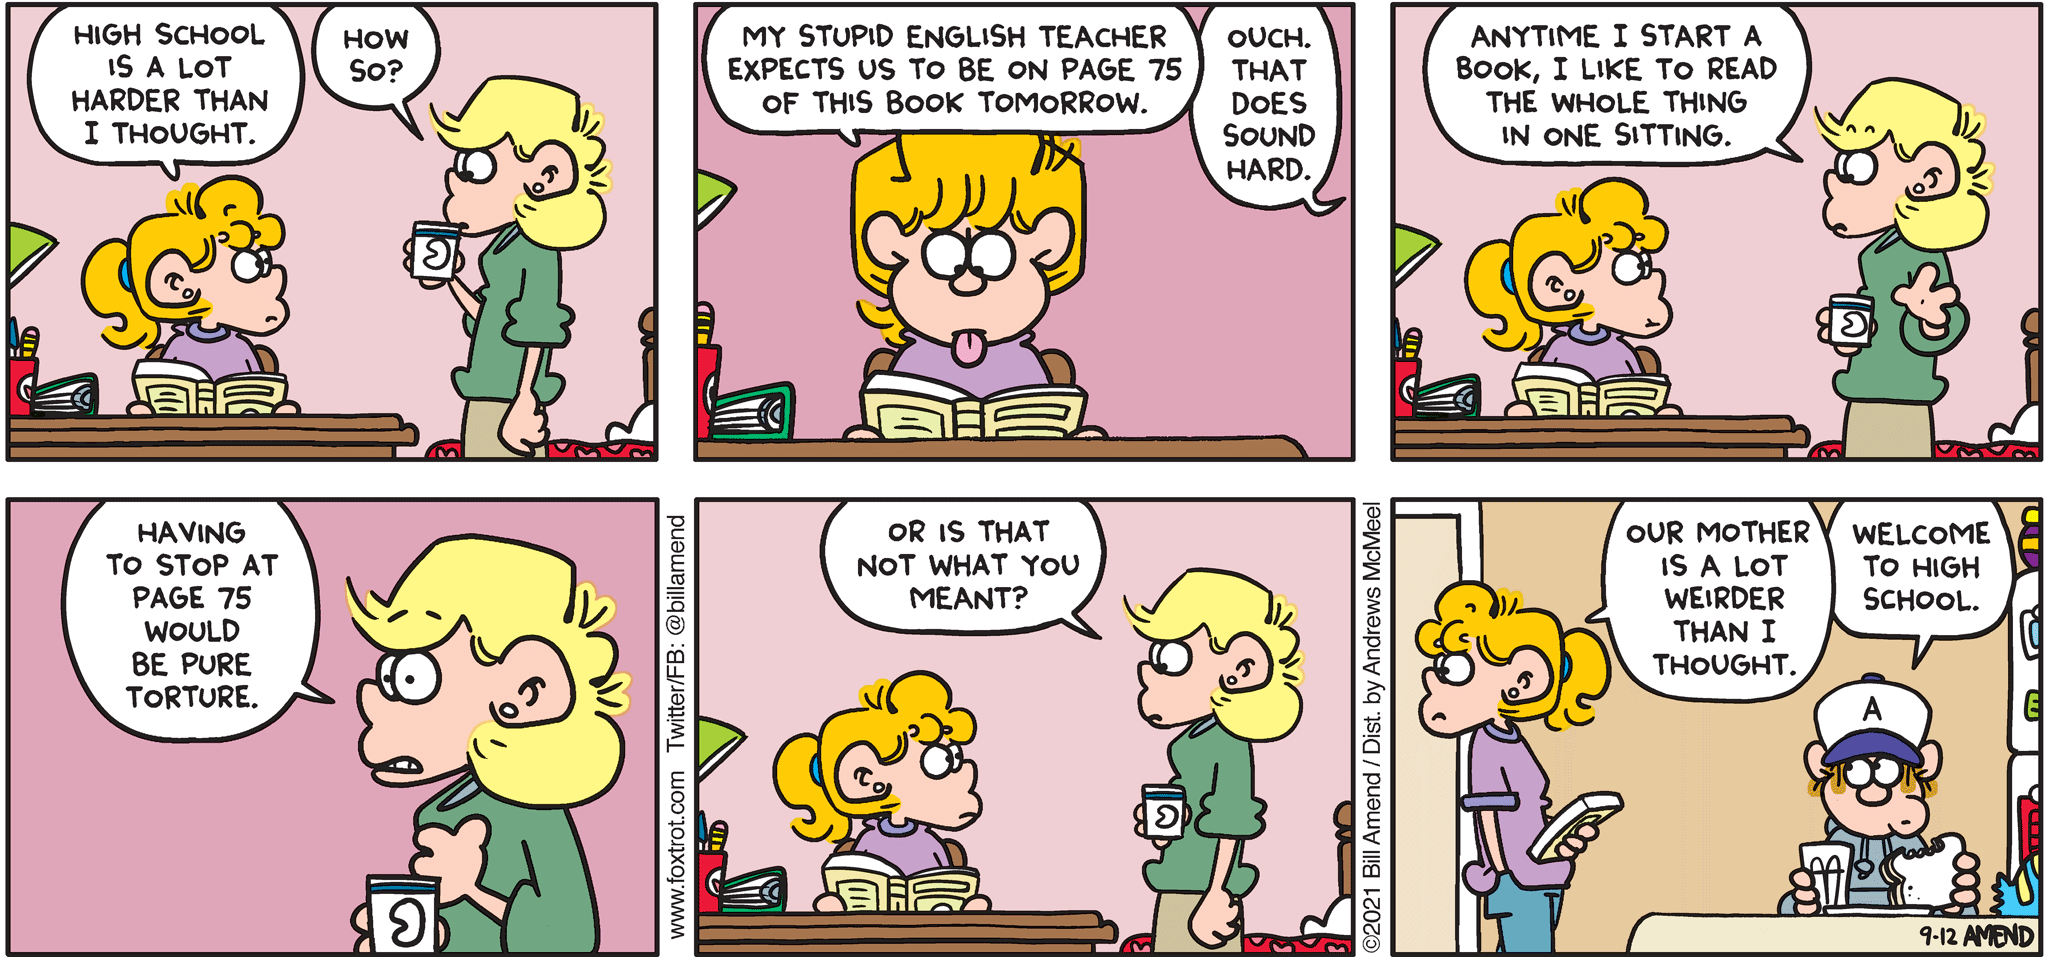 FoxTrot comic strip by Bill Amend - "High School Annoyances" published September 12, 2021 - Paige Fox: High school is a lot harder than I thought. Andy Fox: How so? Paige Fox: My stupid English teacher expects us to be on page 75 of this book tomorrow. Andy Fox: Ouch. That does sound hard. Anytime I start a book, I like to read the whole thing in one sitting. Having to stop at page 75 would be pure torture. Or is that not what you meants? Paige Fox: Our mother is a lot weirder than I thought. Peter Fox: Welcome to high school. 